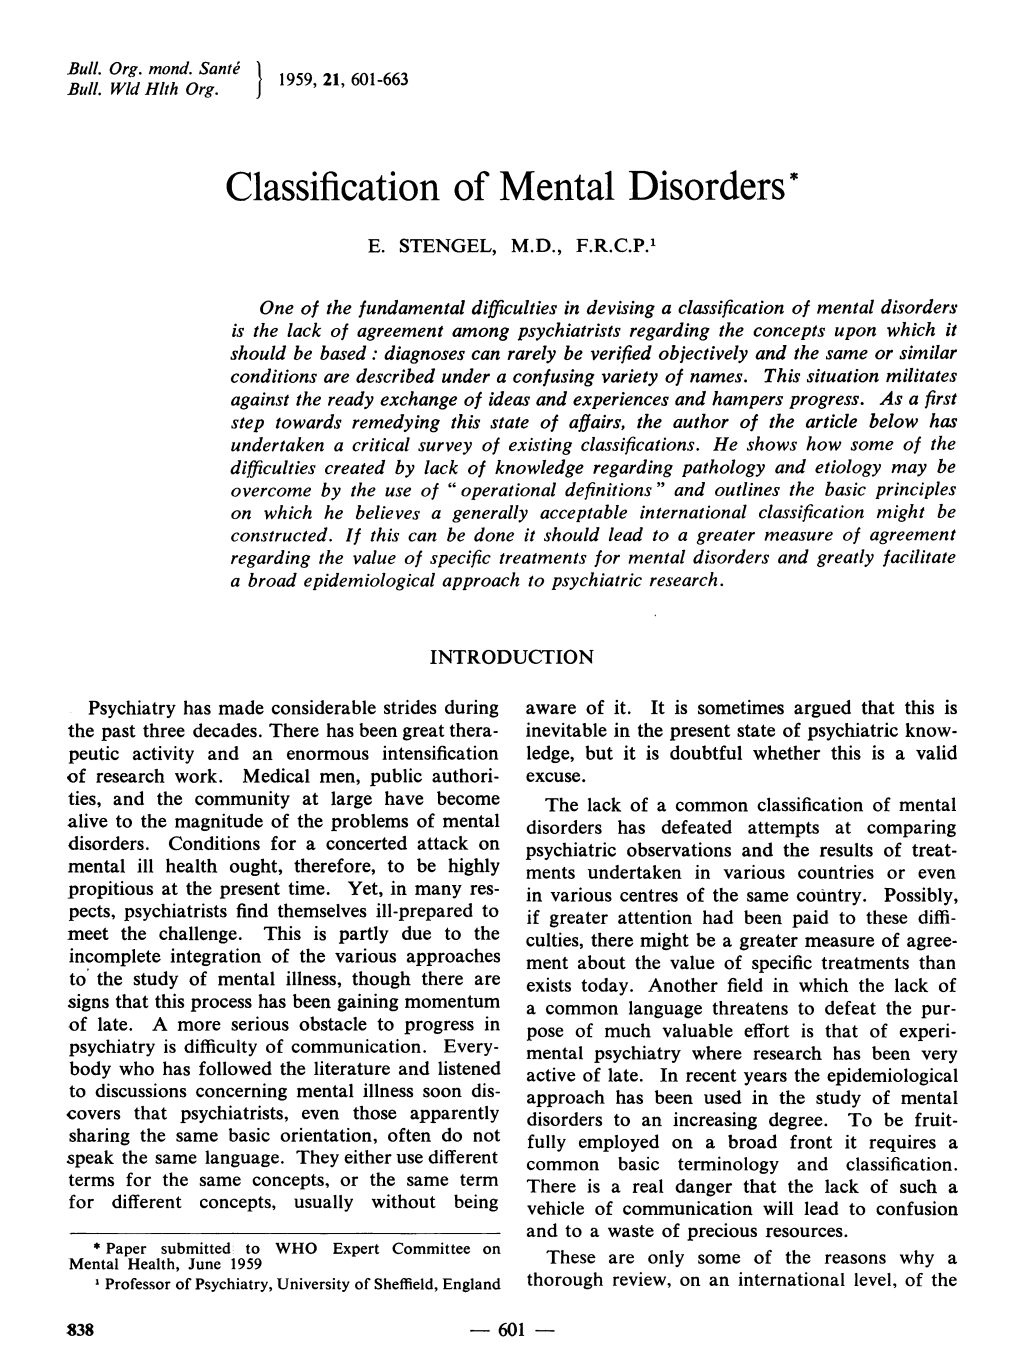 Classification of Mental Disorders